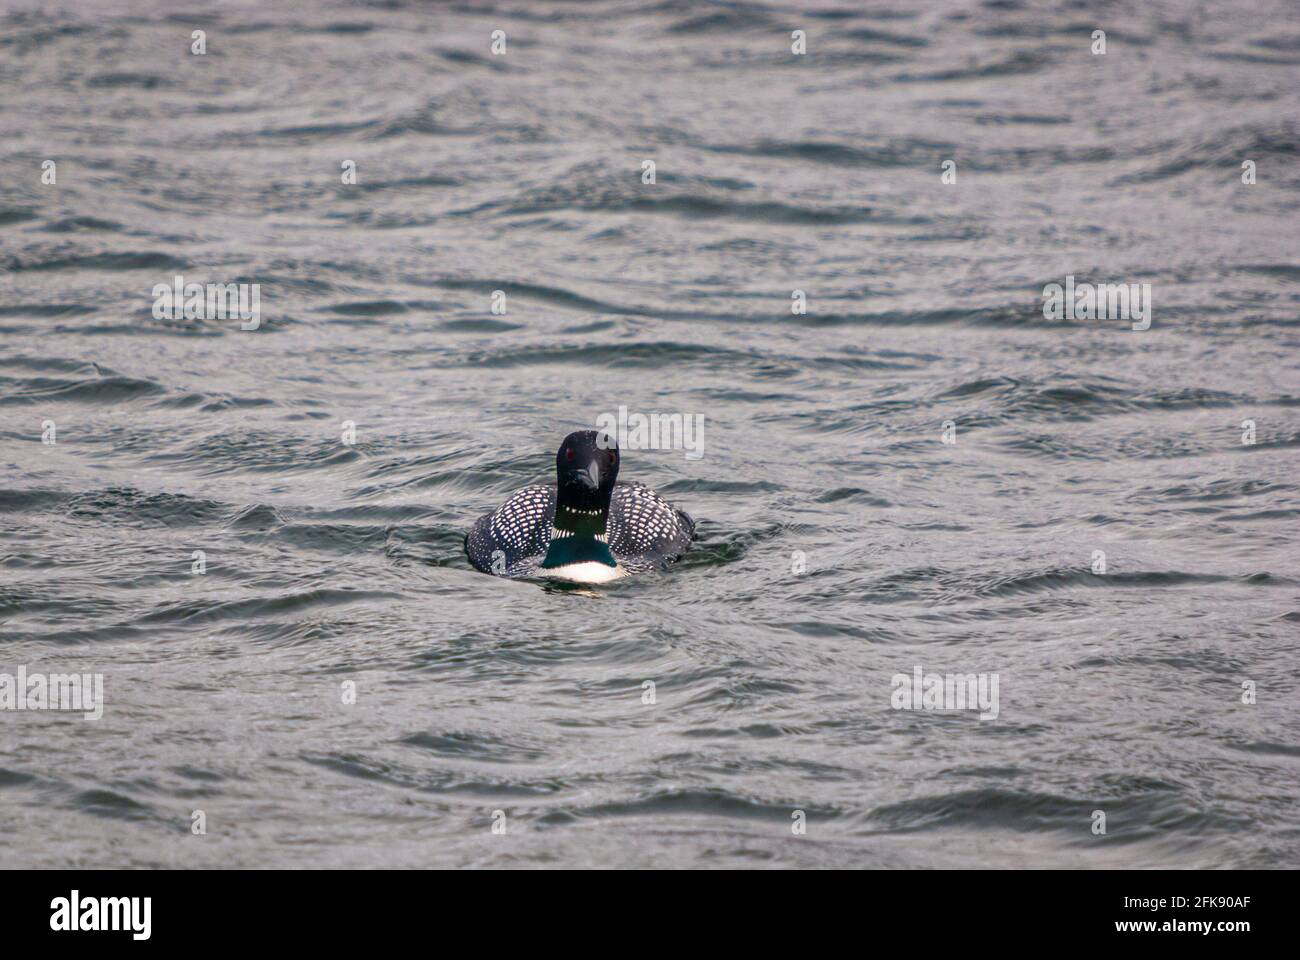 A damp, spring, 3 shot HDR image of a Great Northern Diver, Gavia immer, also know as the Common Loon, at Carradale, Kintyre, Scotland. 17 April 2010 Stock Photo